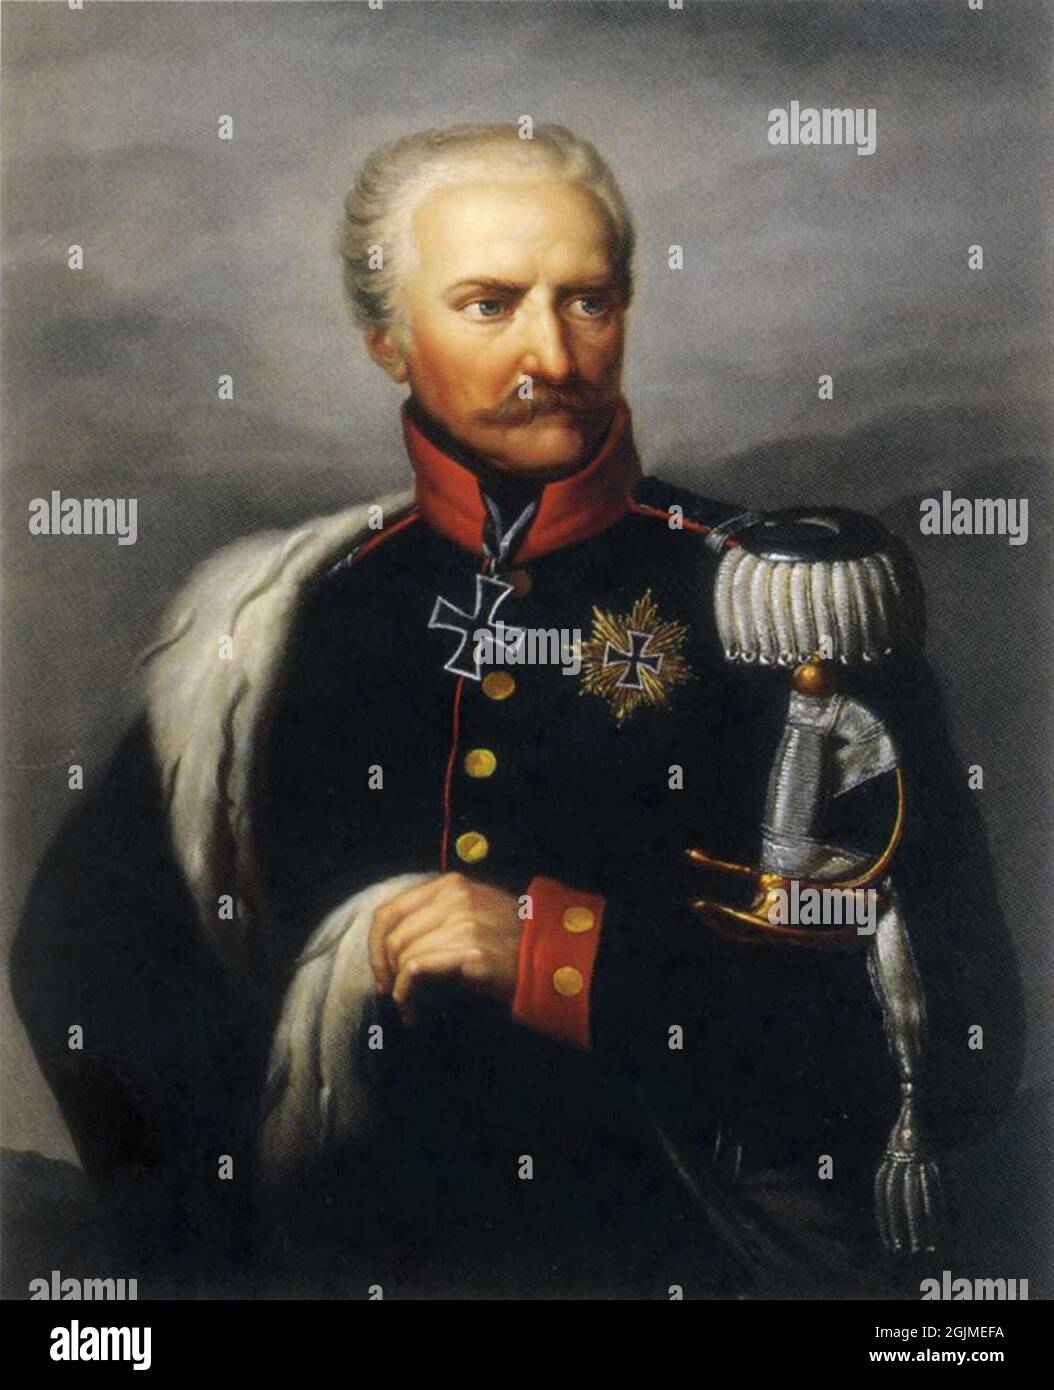 A portrait of Gebhard Leberecht von Blücher, whose timely intervention ensured the defeat of Napoleon at the Battle of Waterloo in 1815, where Napoleon's Grande Armée was narrowly defeated by Wellington and Blücher's combined armies Stock Photo